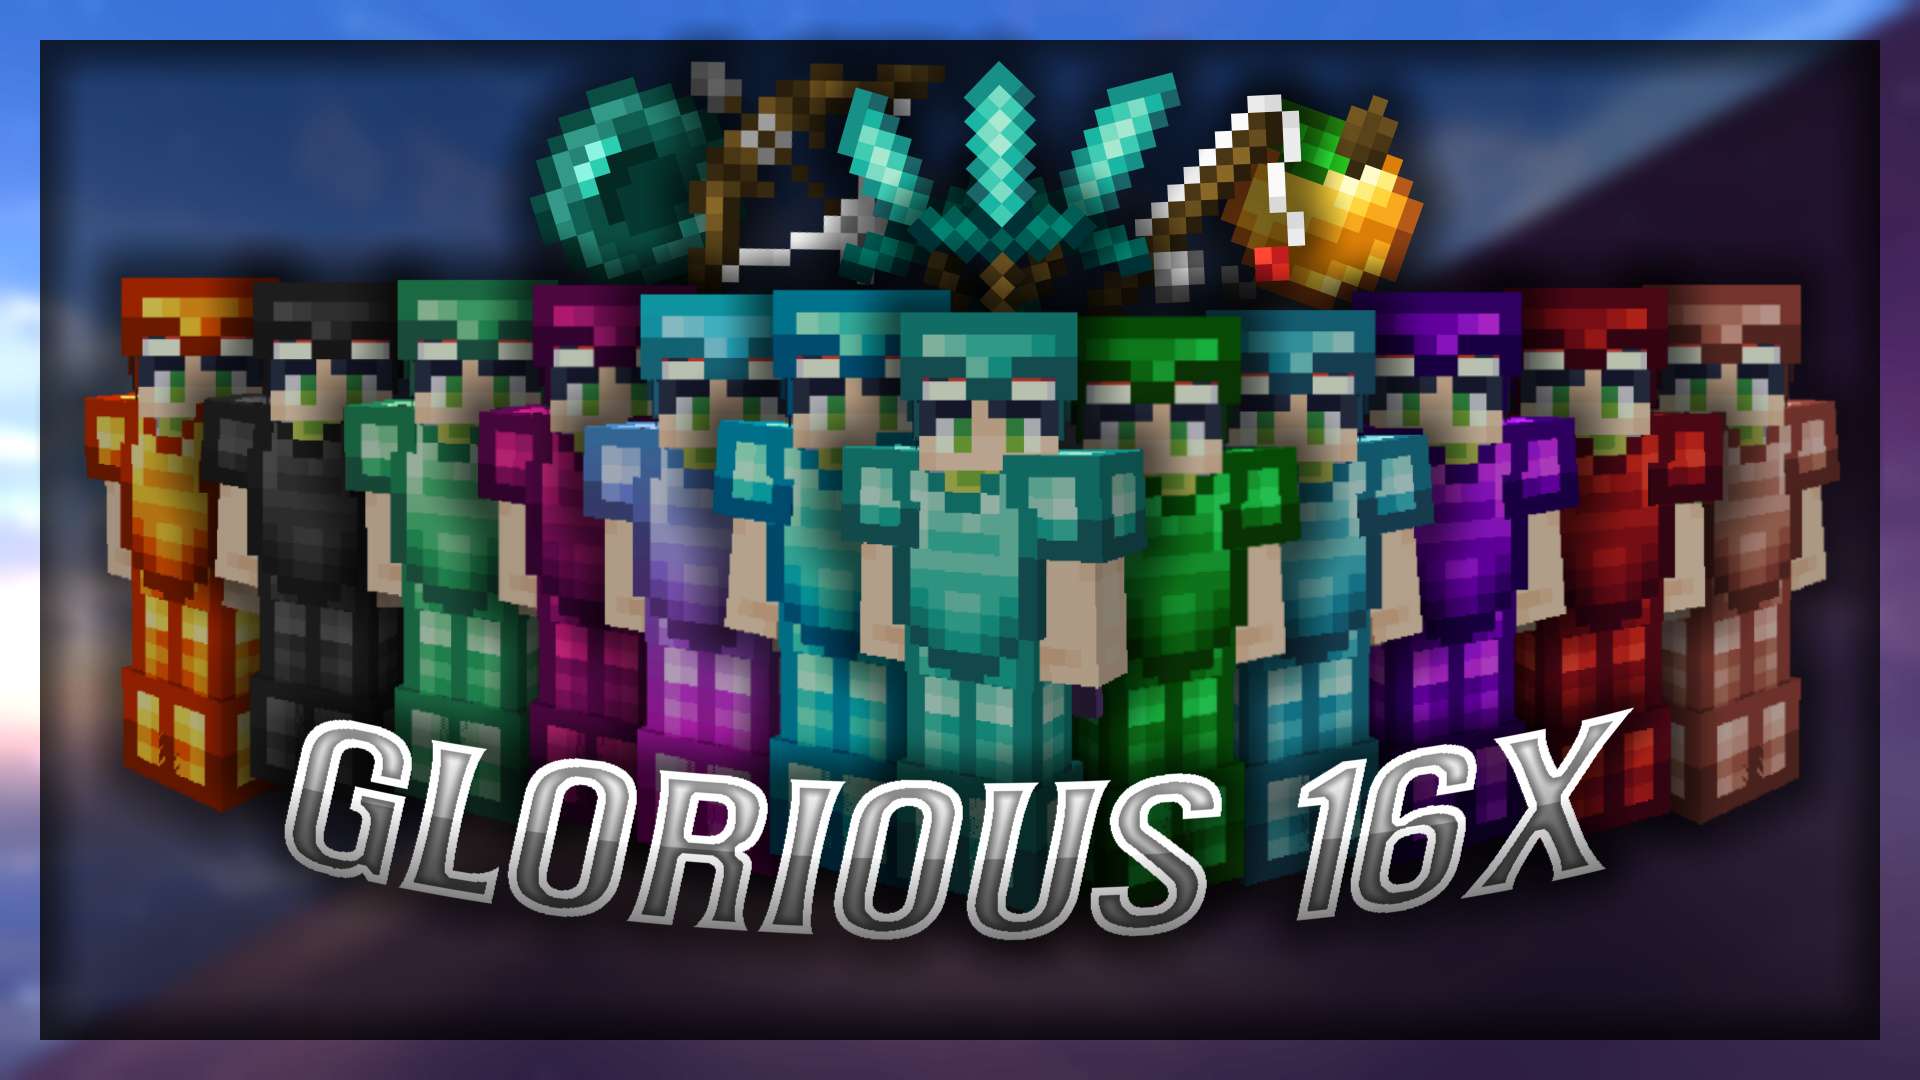 (open zip with WinRAR) Glorious - Jade  16 by Mek on PvPRP